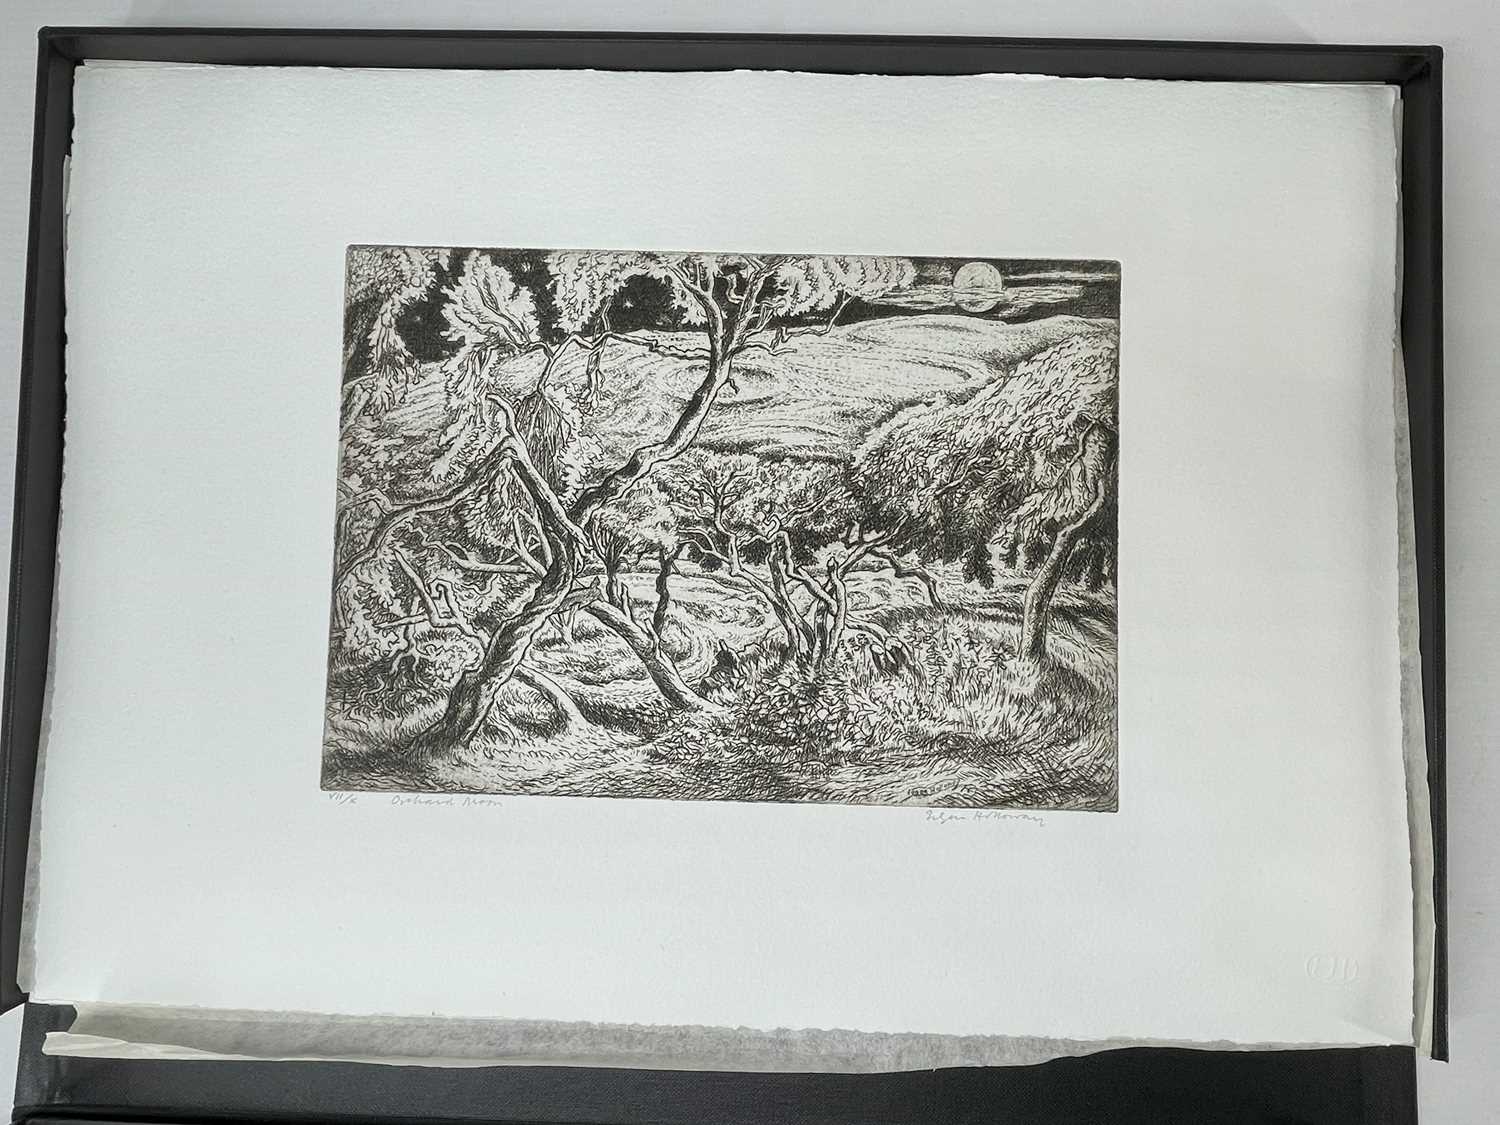 ‡ EDGAR HOLLOWAY limited edition (7/40) portfolio of seven etchings and engravings produced by - Image 13 of 13